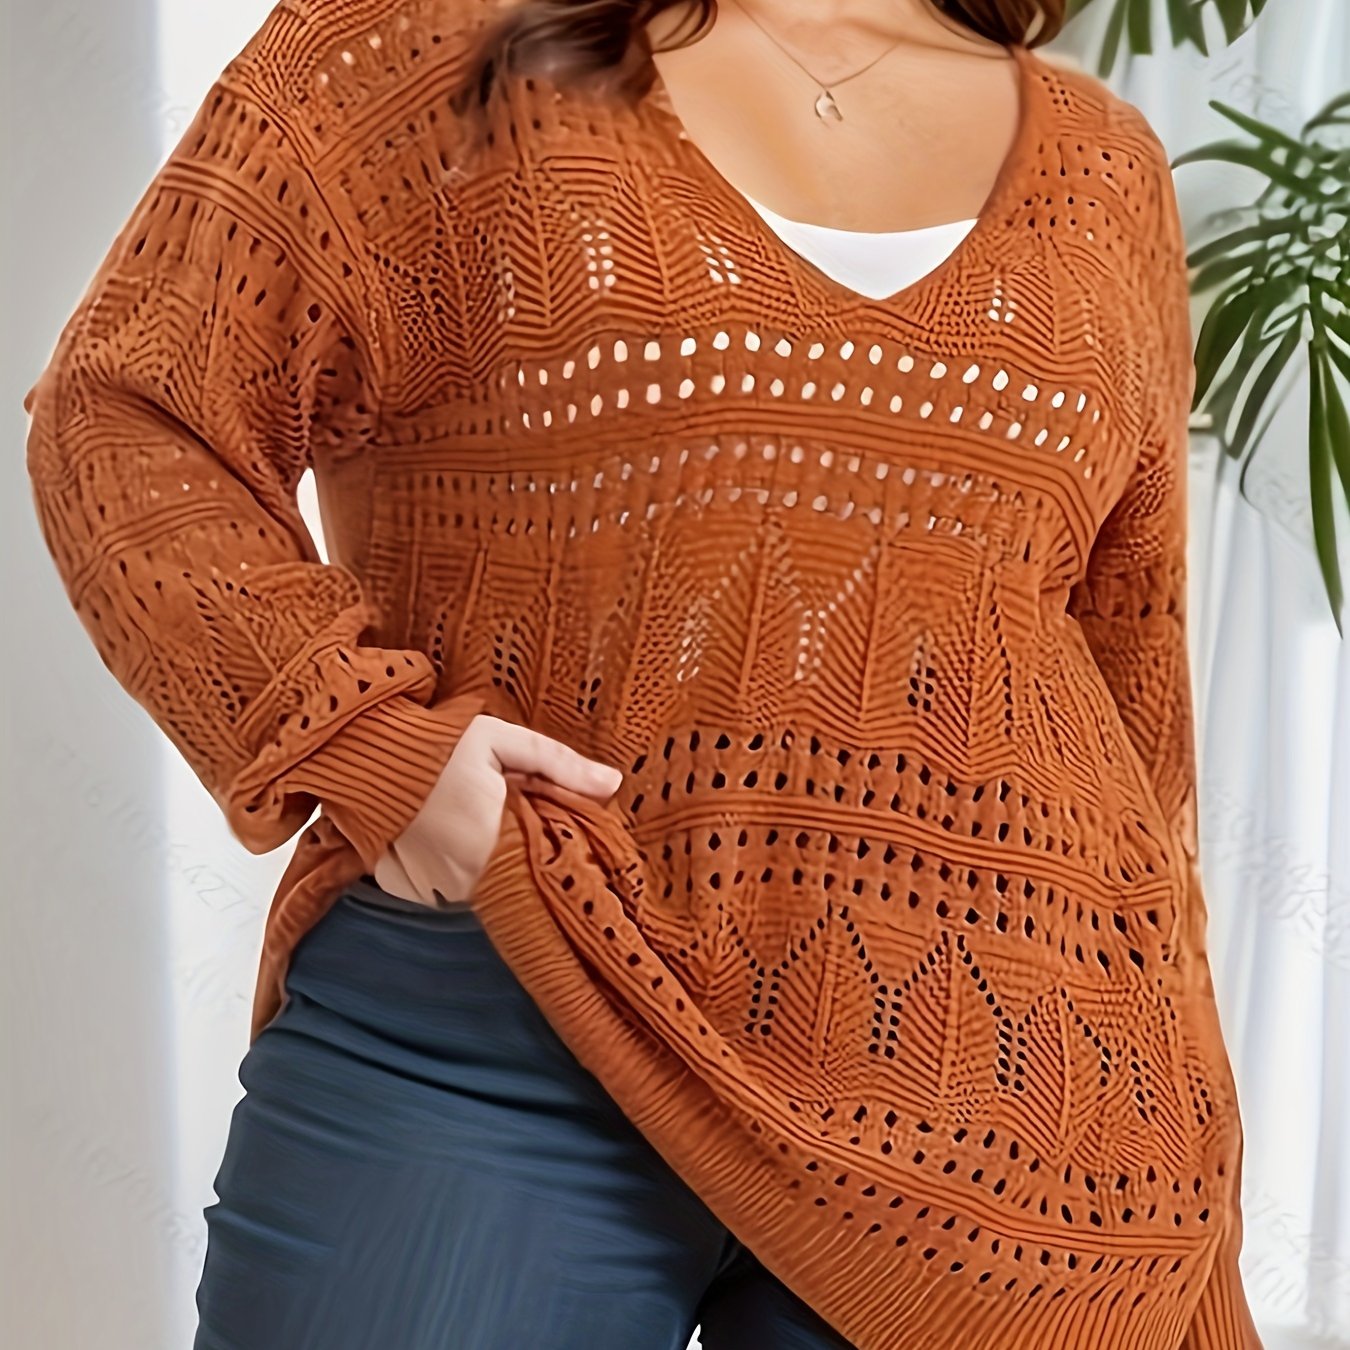 Plus Size Casual Knit Top, Women's Plus Solid Hollow Out Long Sleeve V Neck Sheer Pullover Sweater Chocolate